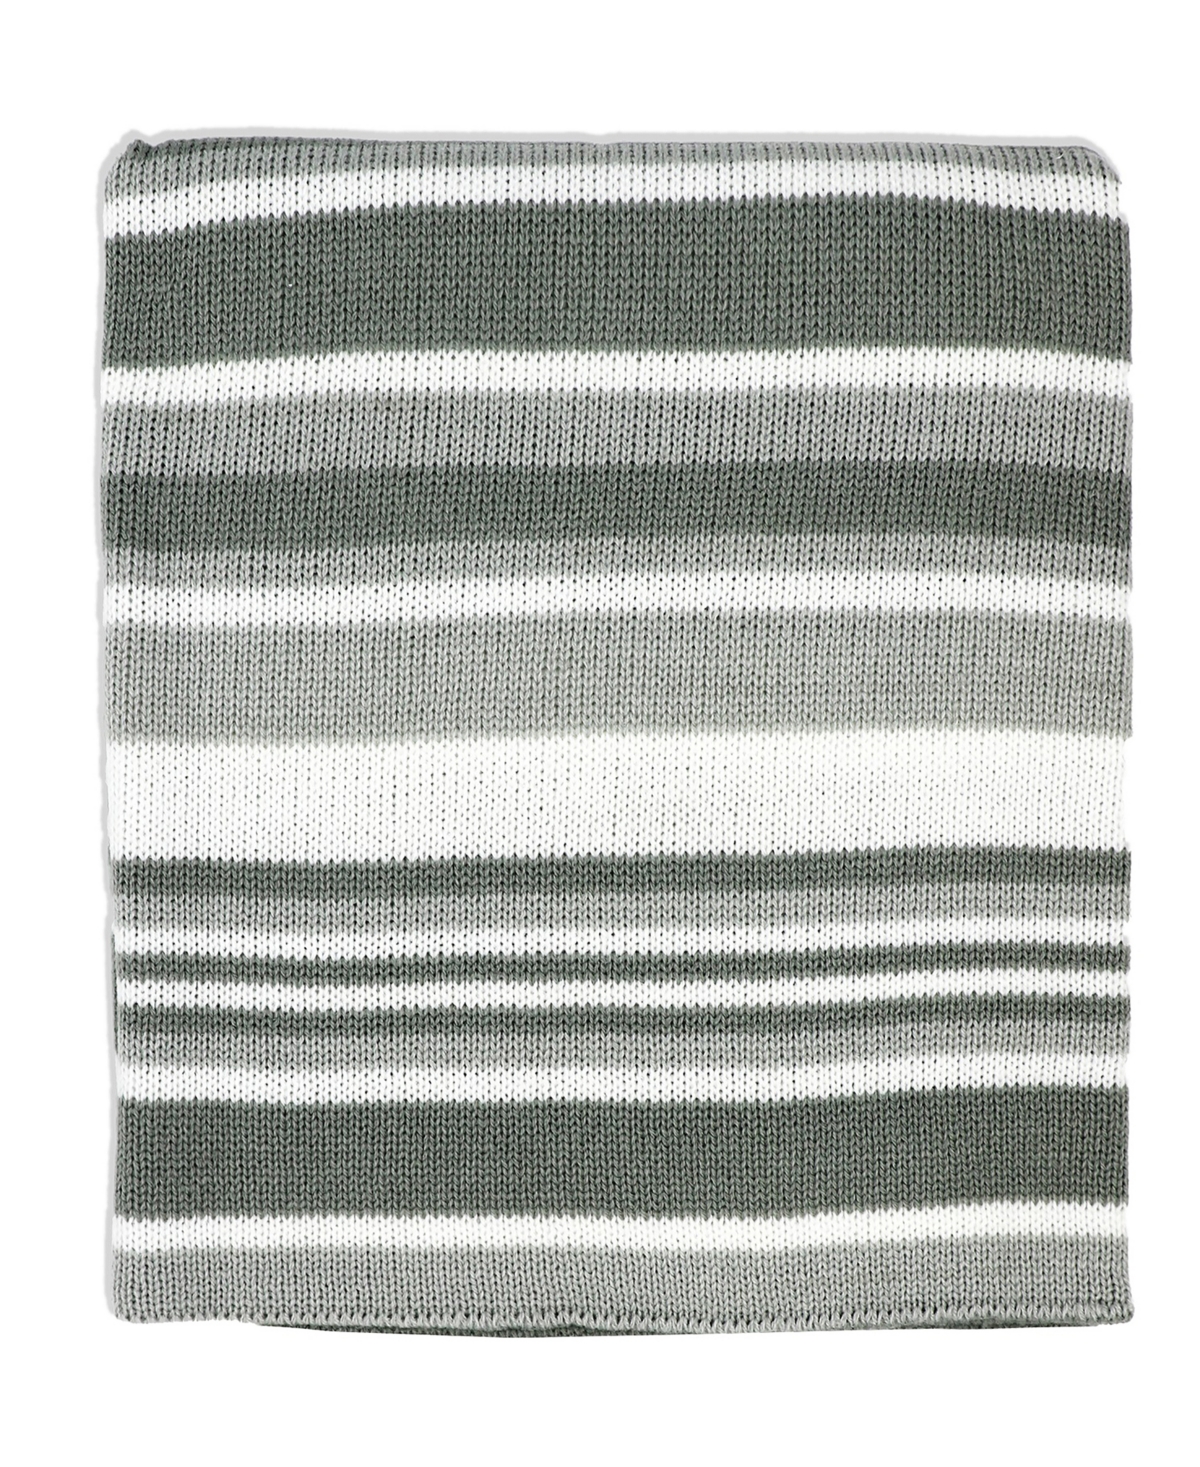 3 Stories Trading Baby Boys Or Baby Girls Cozy Striped Knit Blanket In Gray